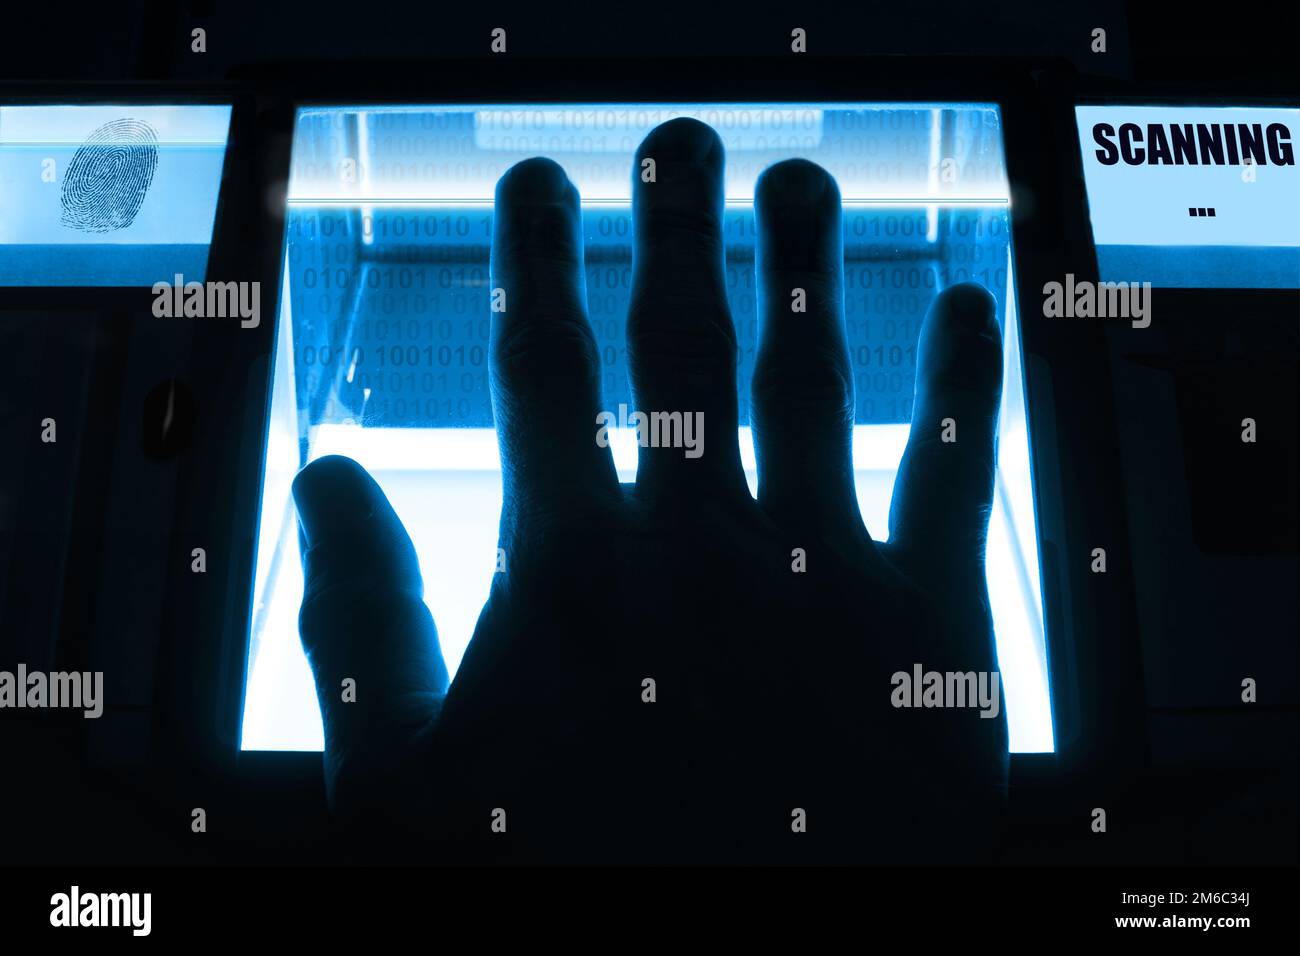 A person uses a fingerprint scanner. Can be used for biometrics or cybersecurity concepts. Stock Photo